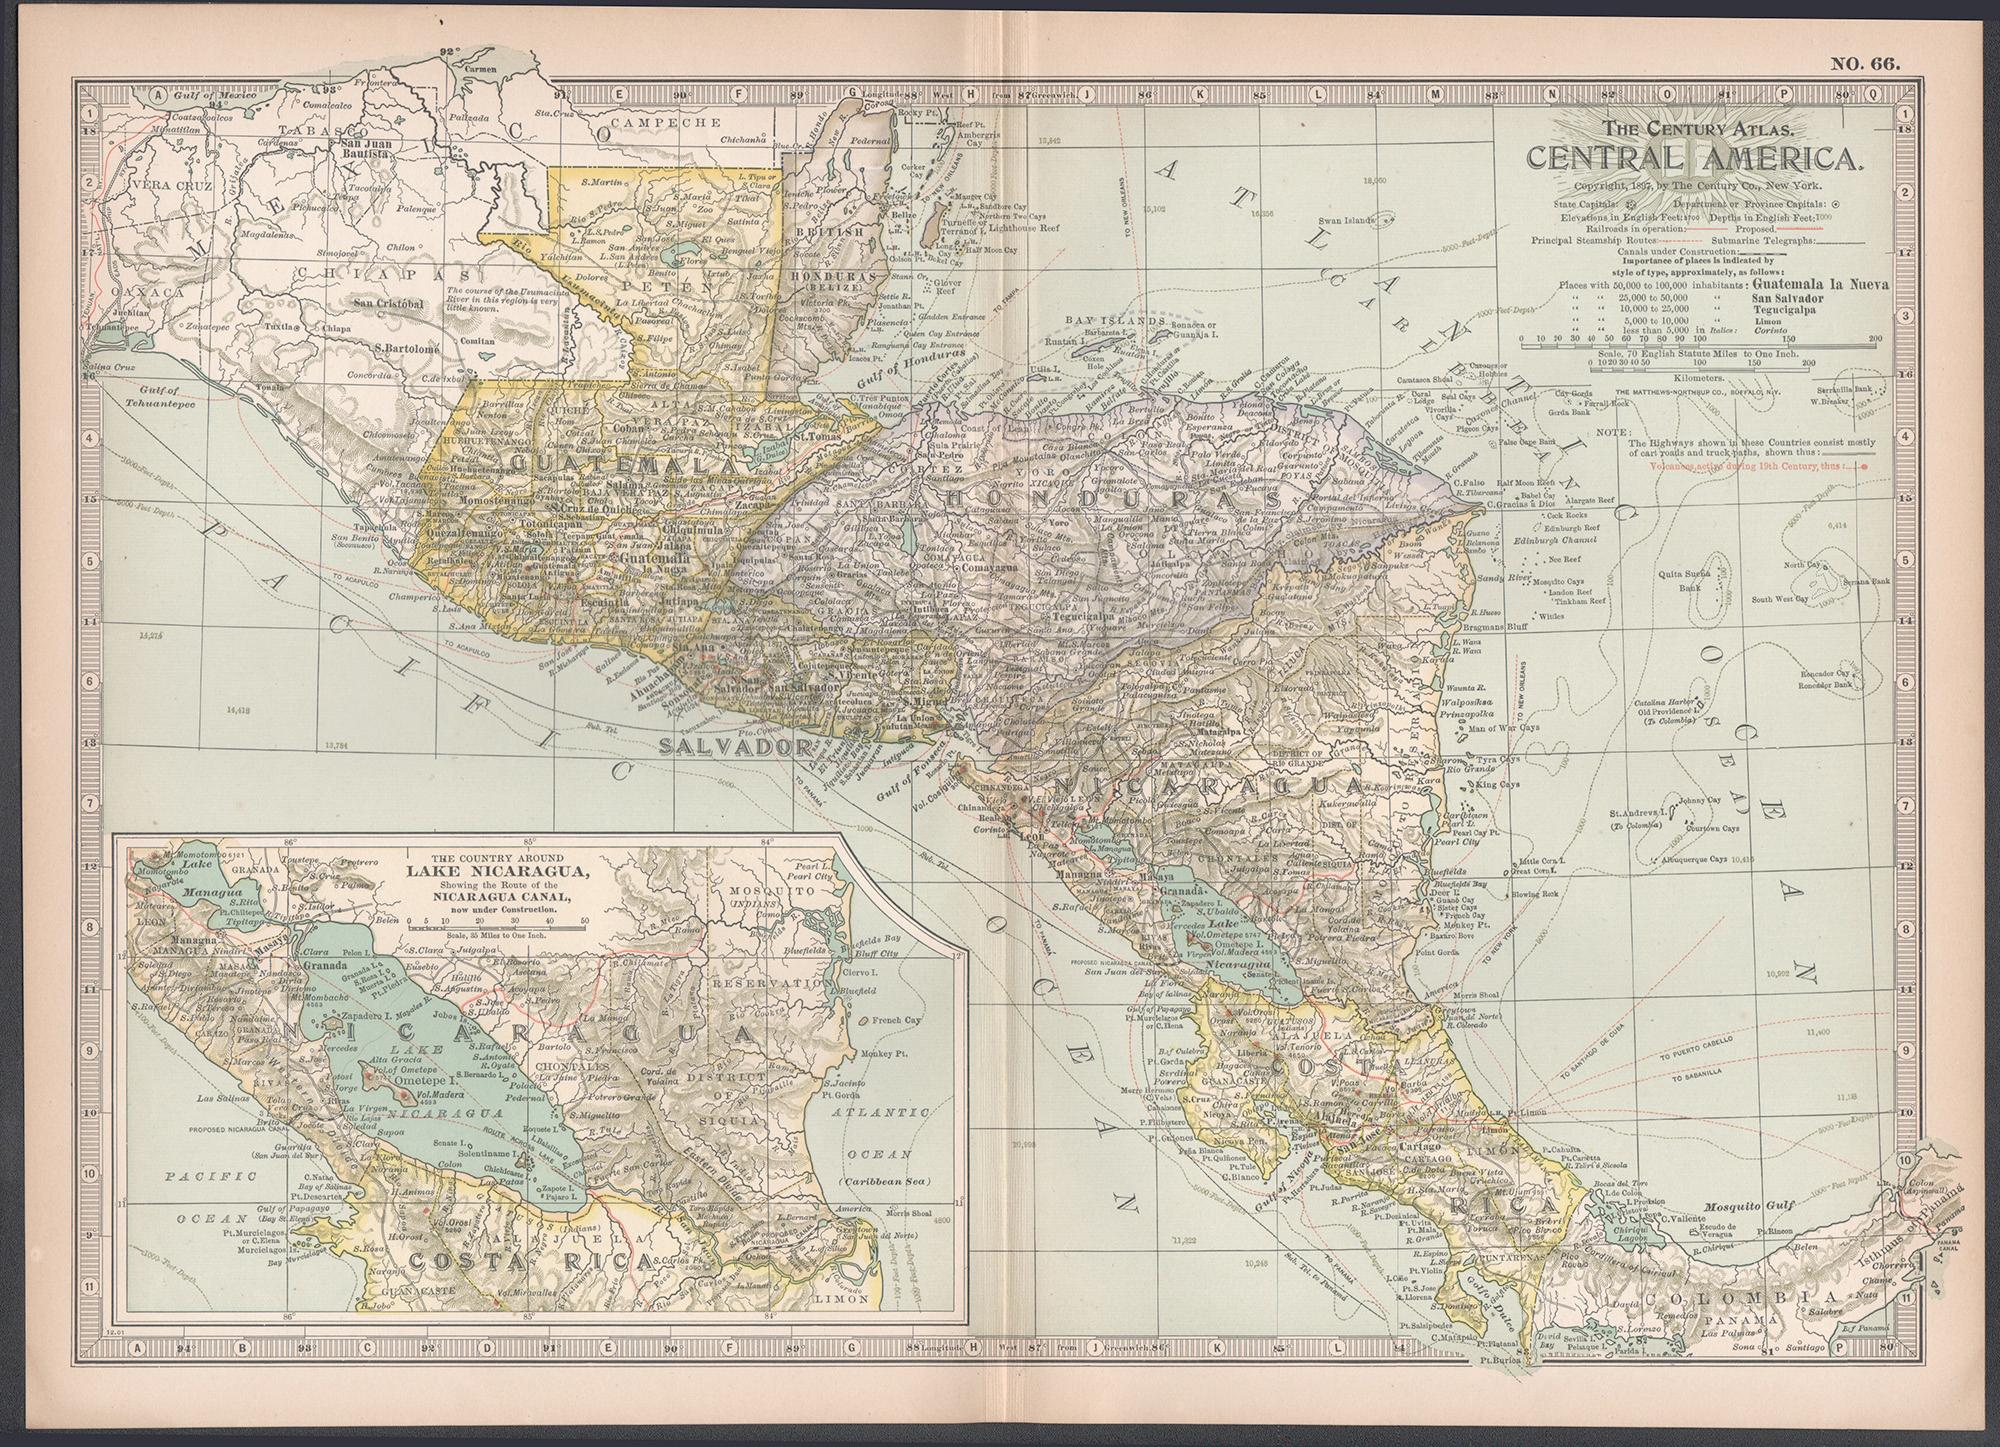 Central America. Century Atlas antique vintage map - Print by Unknown